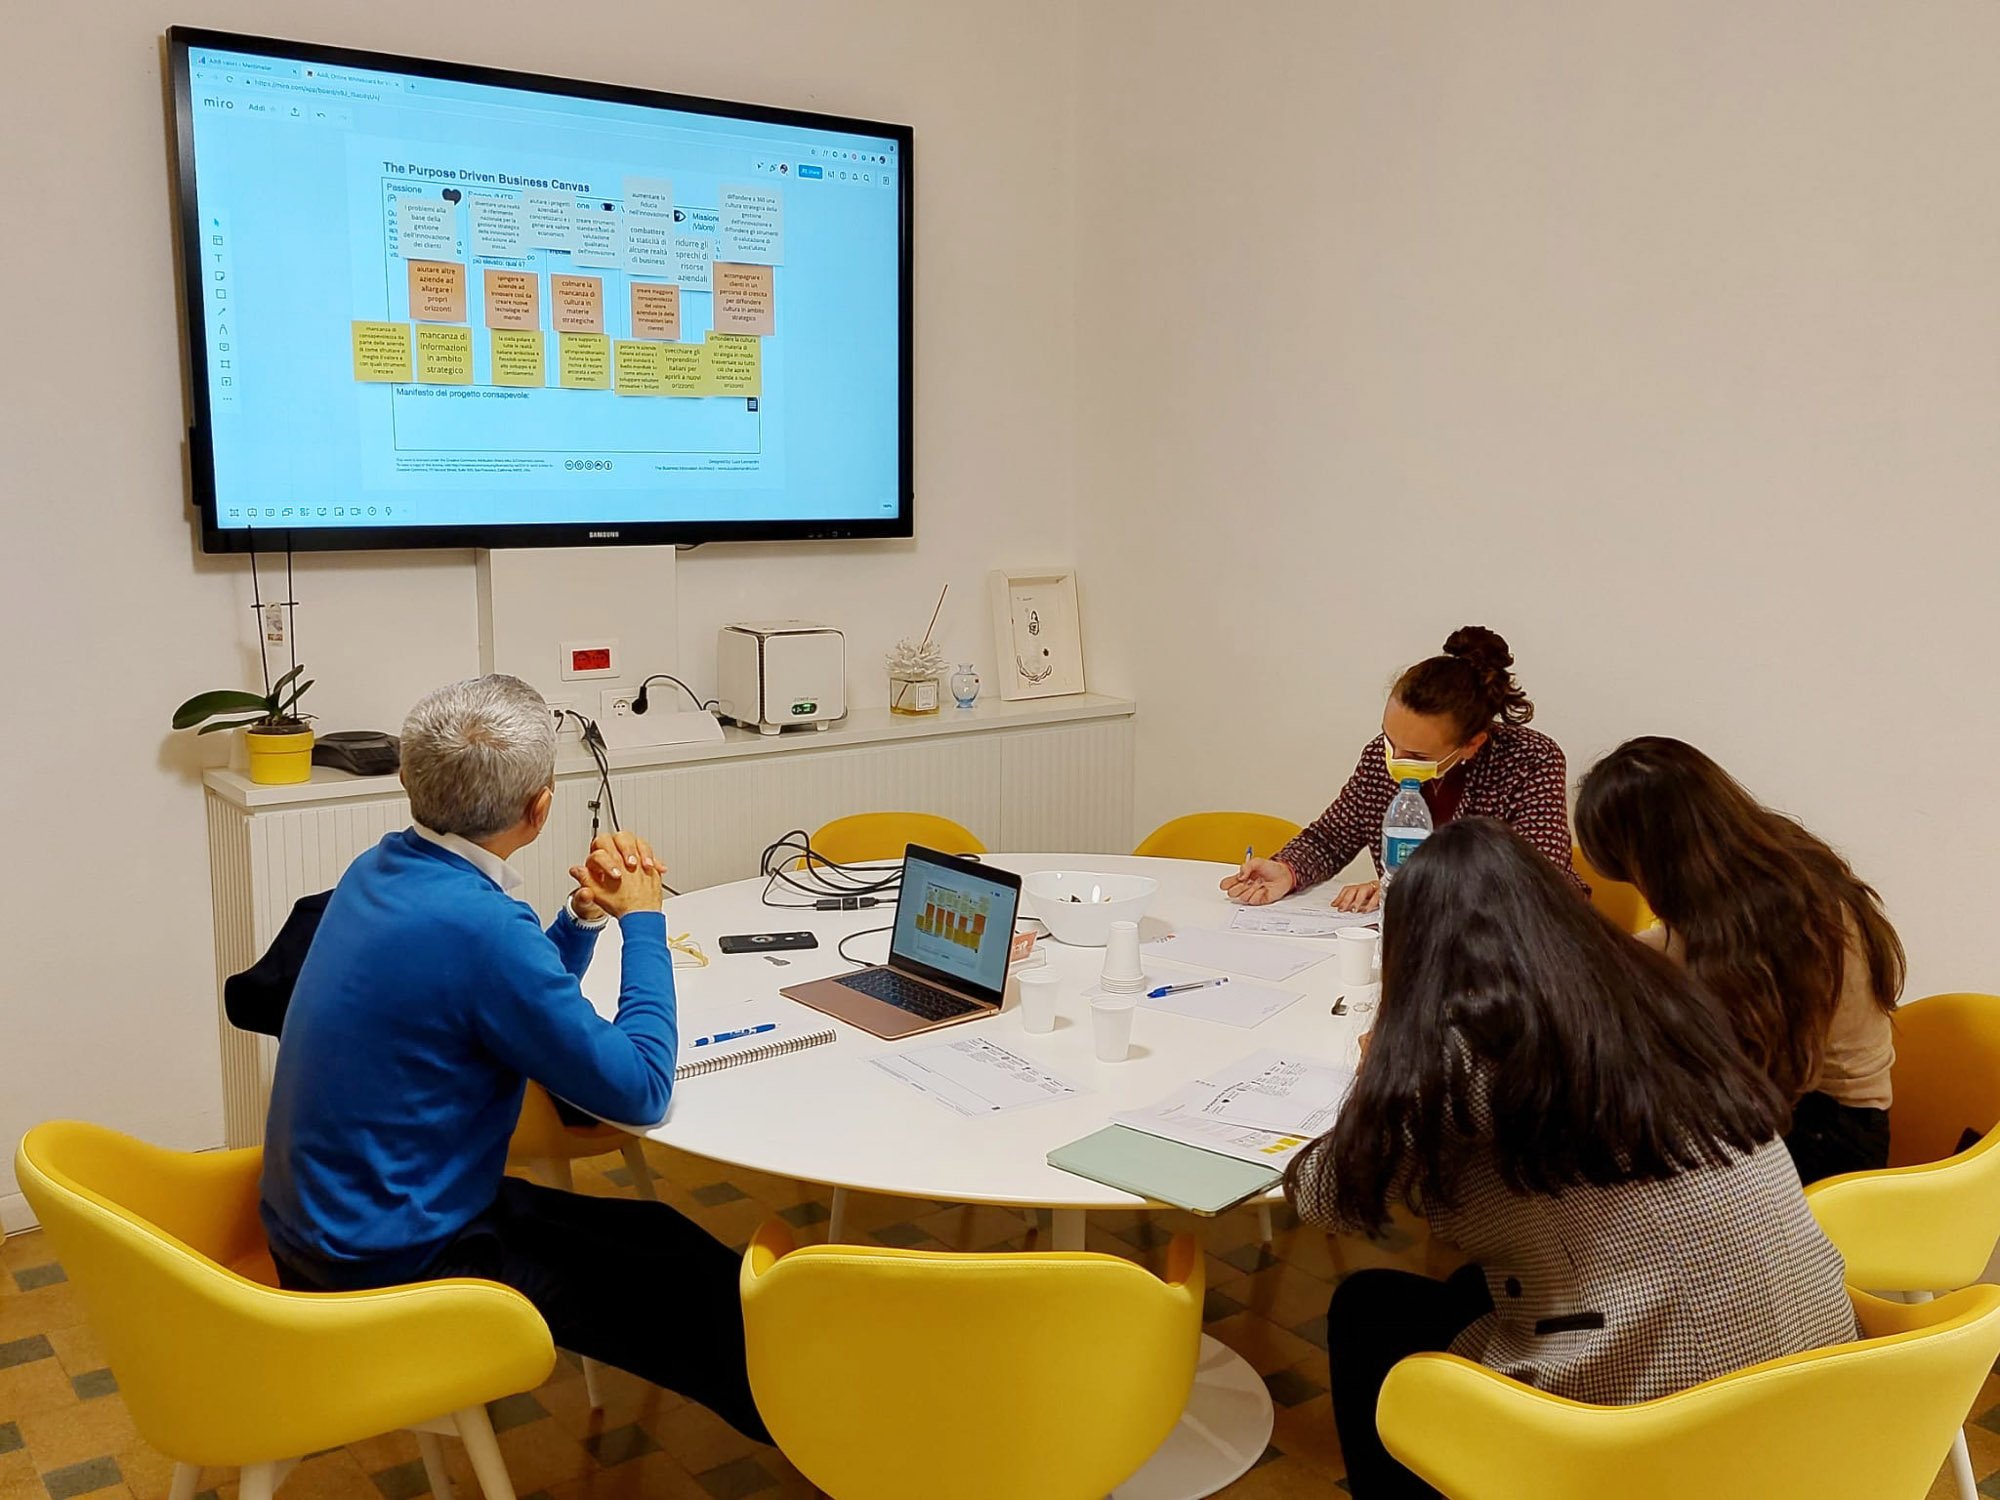 A group of people gathered around a table, focused on the content being projected onto a screen.